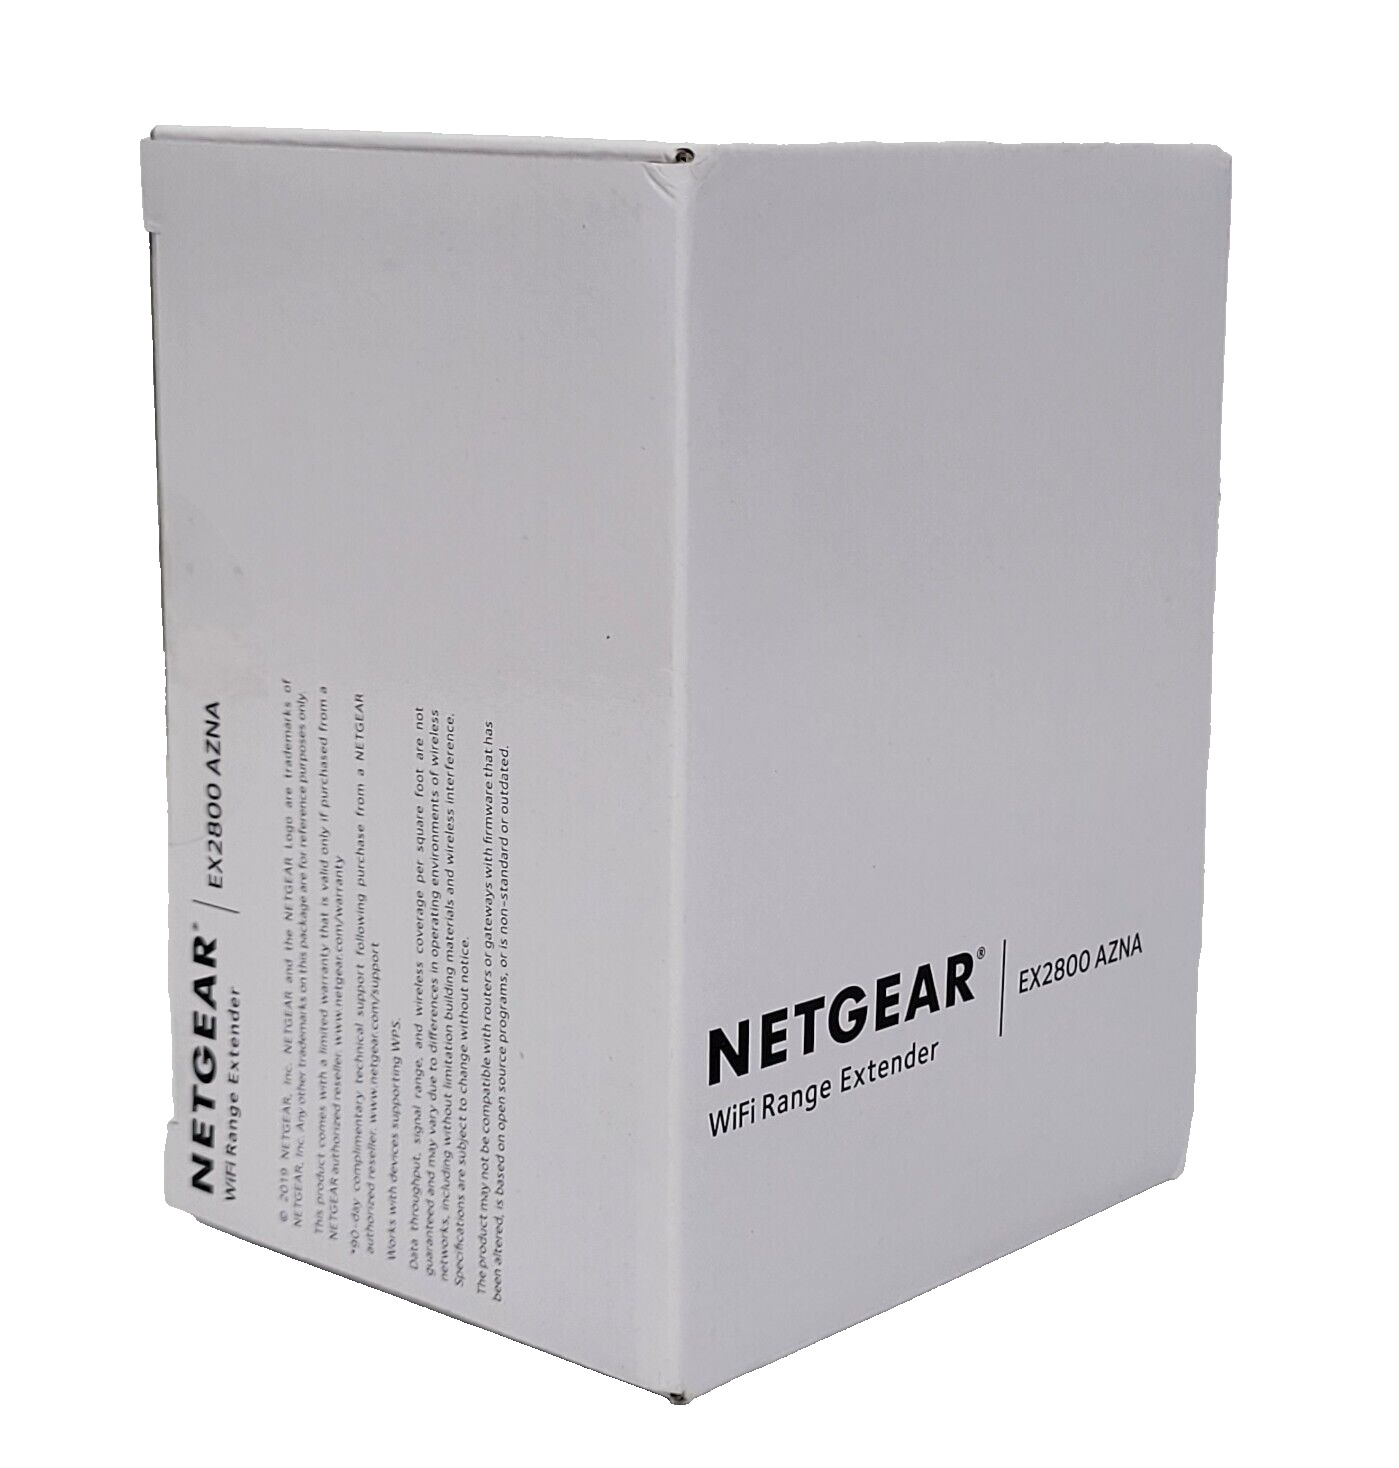 OPEN NETGEAR WiFi Range Extender EX2800 Coverage up to 600 sq.ft. & 15 Devices📡